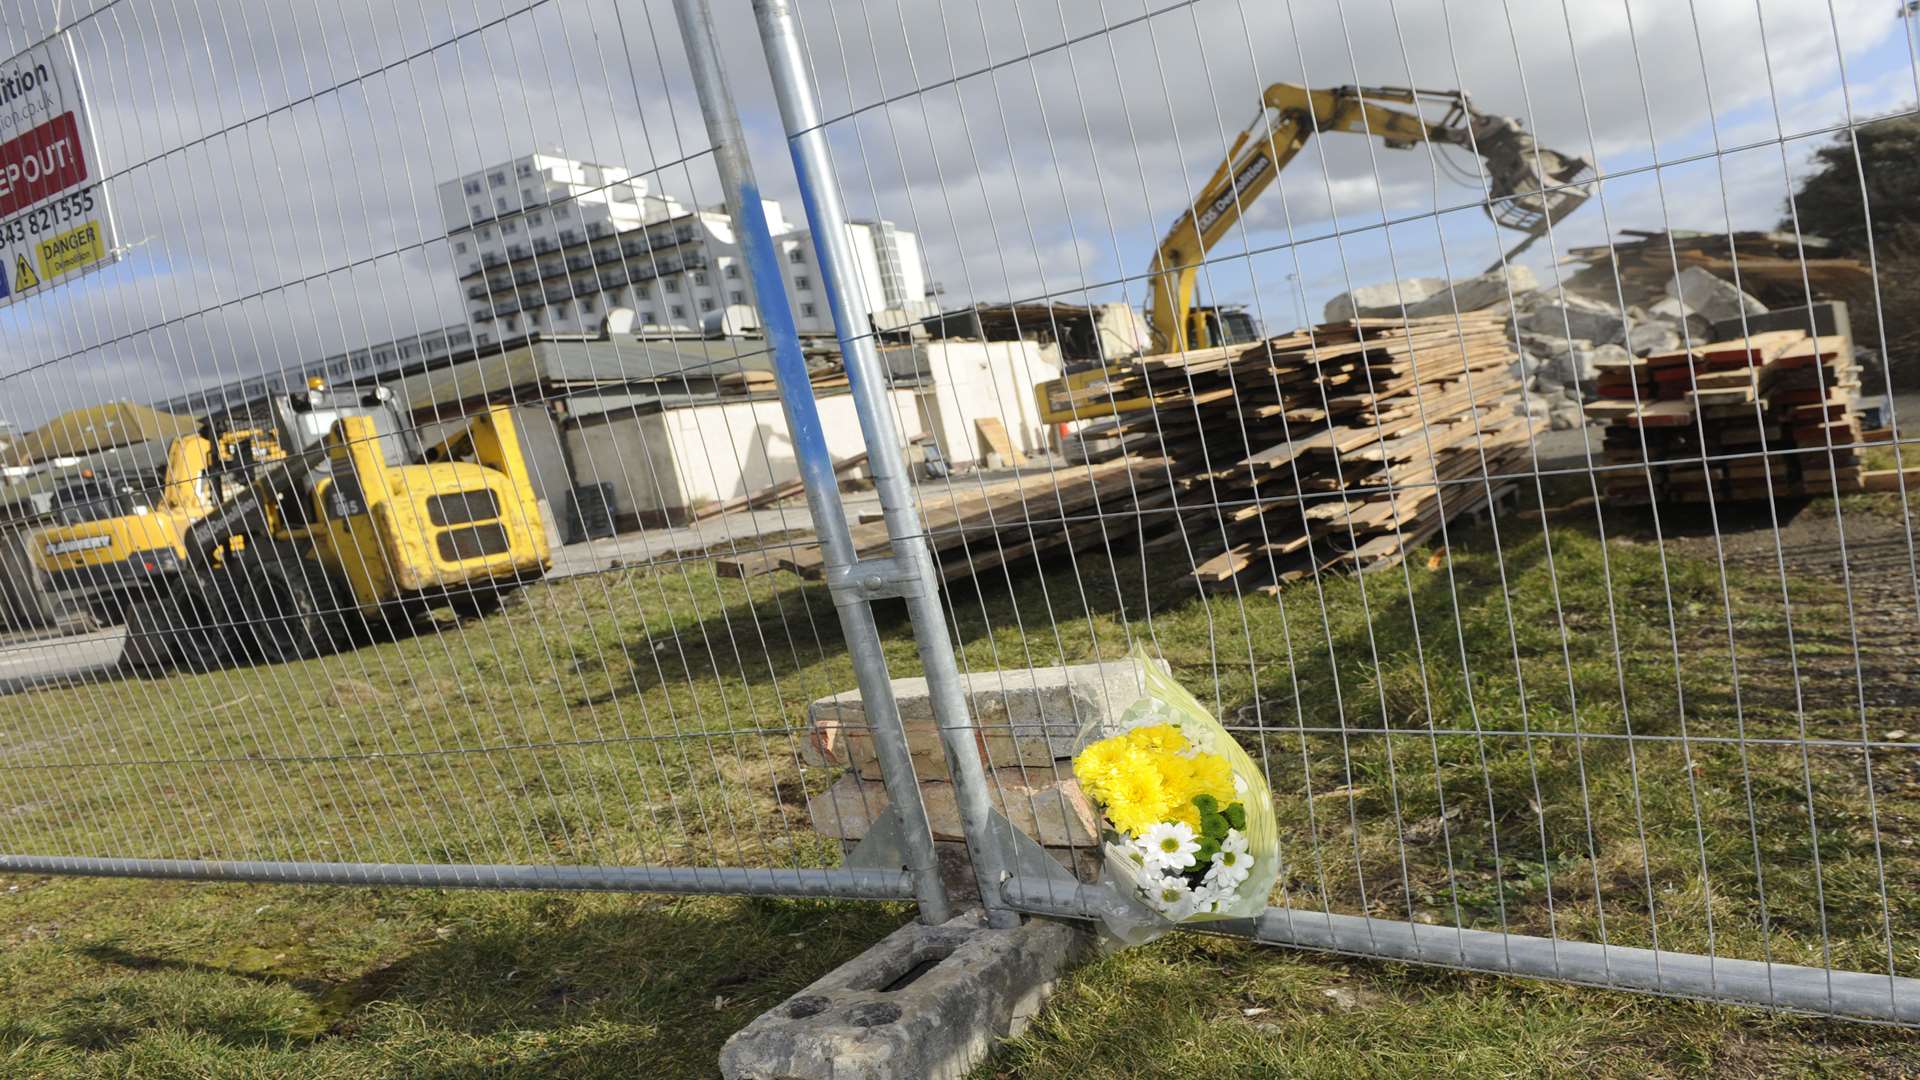 Floral tributes were left to The Priz as demolition started in the week before the fire. Picture: Tony Flashman